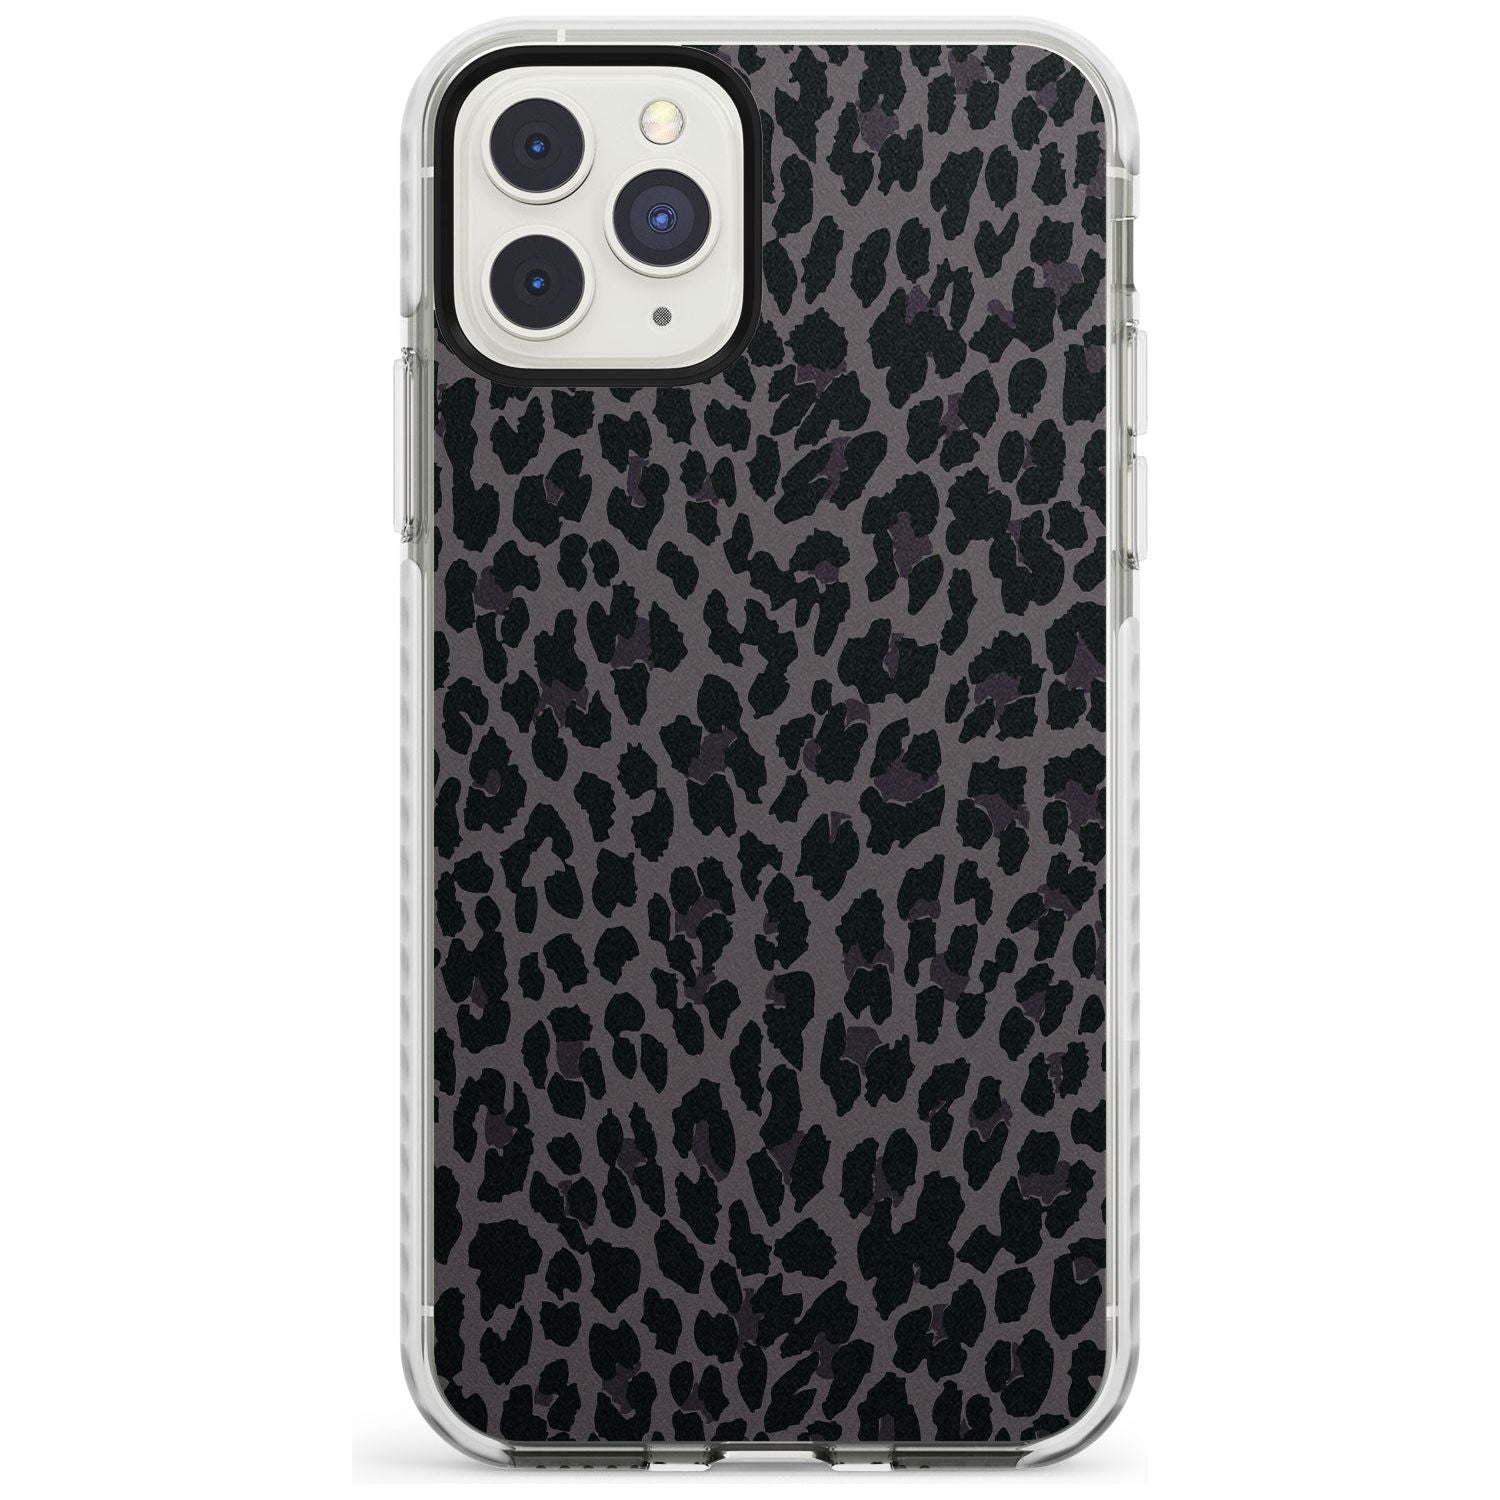 Dark Animal Print Pattern Small Leopard Impact Phone Case for iPhone 11 Pro Max